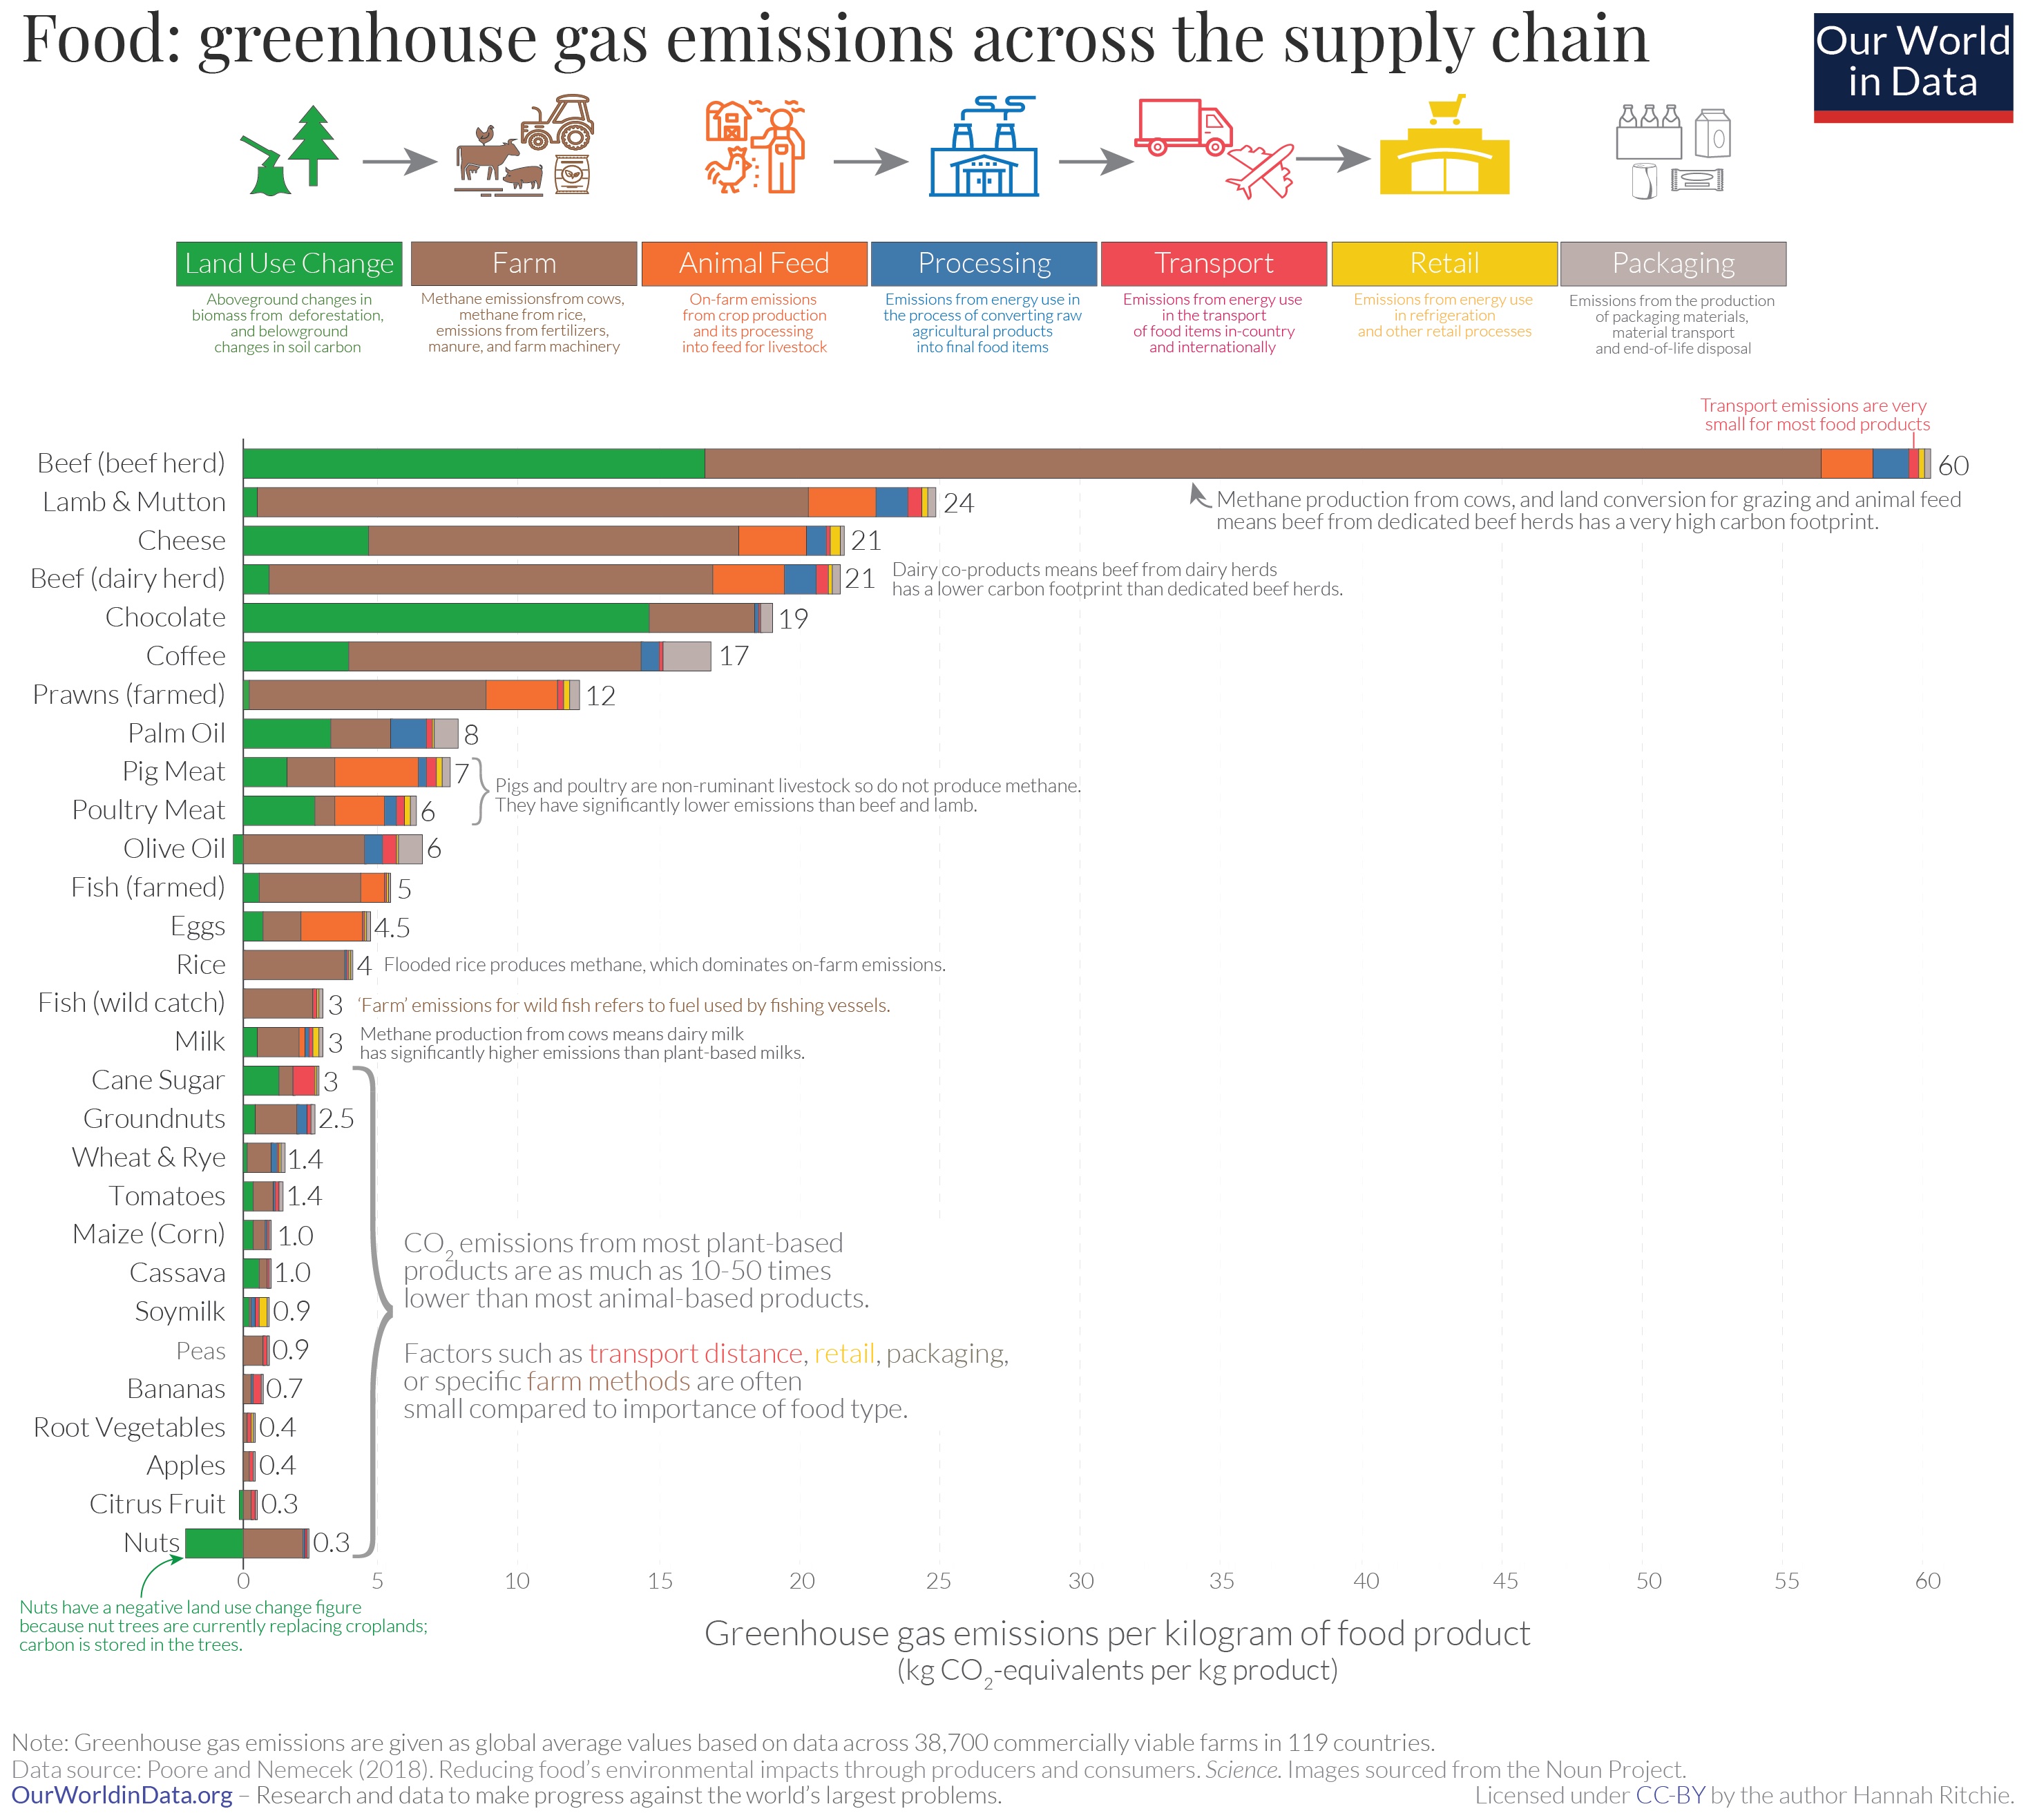 Infographic from our world in data showing greenhouse gas emissions per kilogram of different food products across supply chain stages, using bar graphs and icons for clarity.